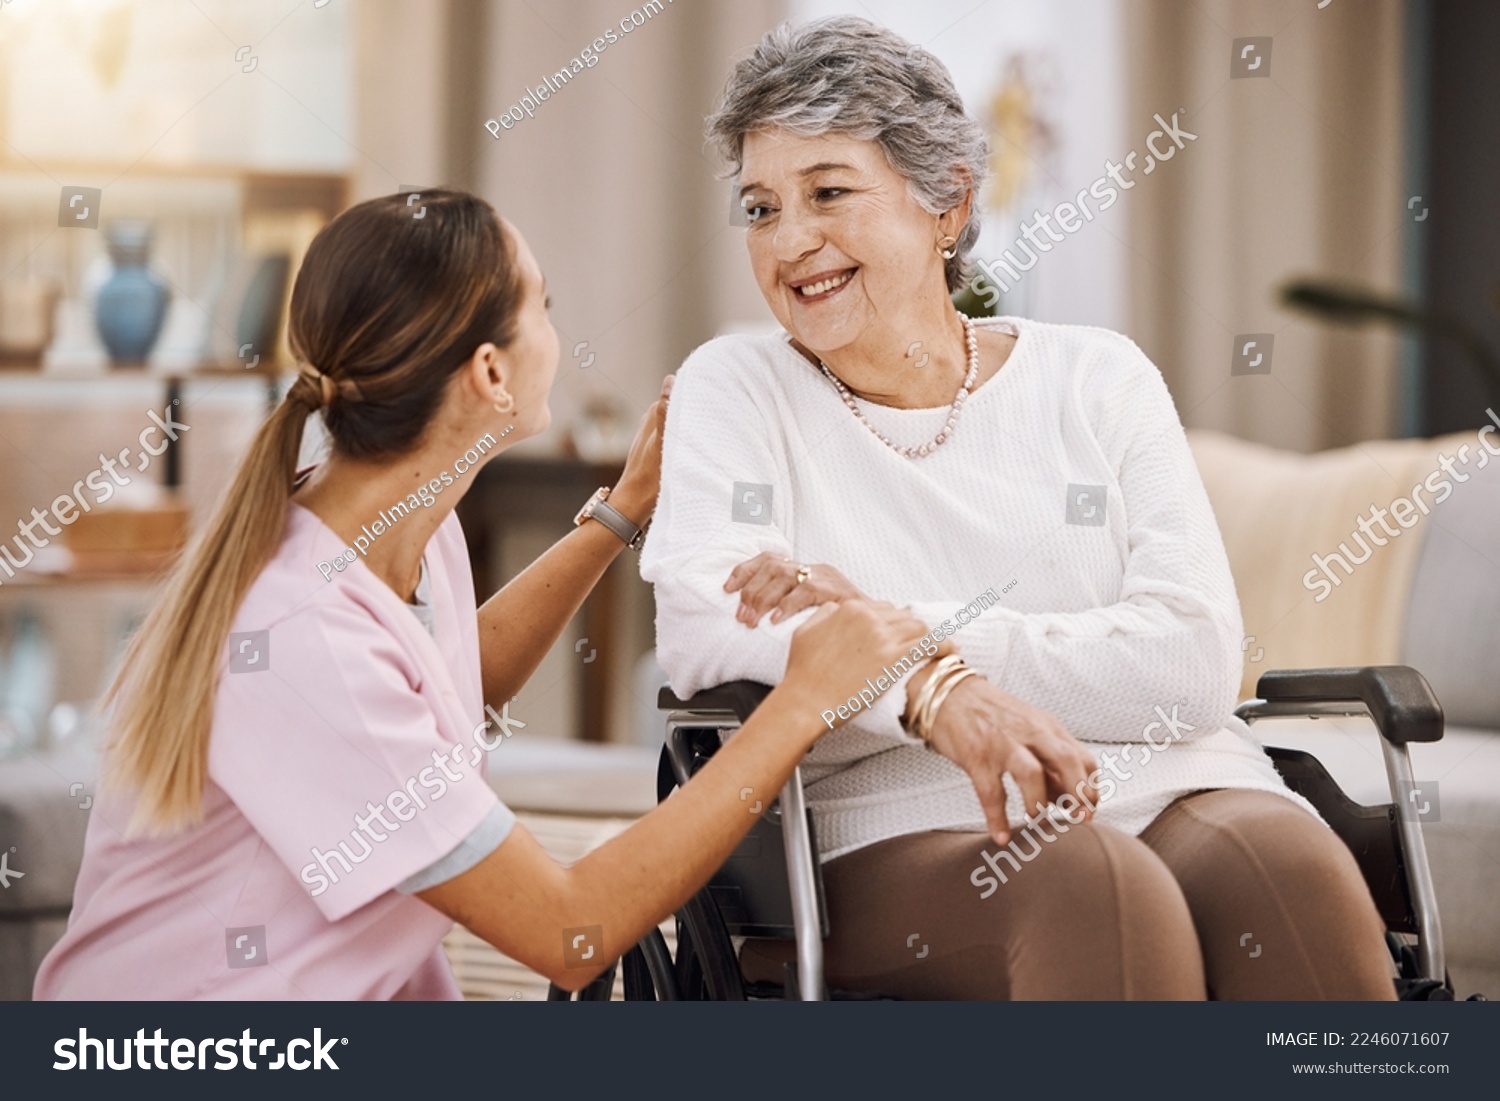 Wheelchair disability, rehabilitation and nurse volunteer at nursing home for charity work. Healthcare, support and caregiver with senior women for medical help, elderly care and consulting patient #2246071607